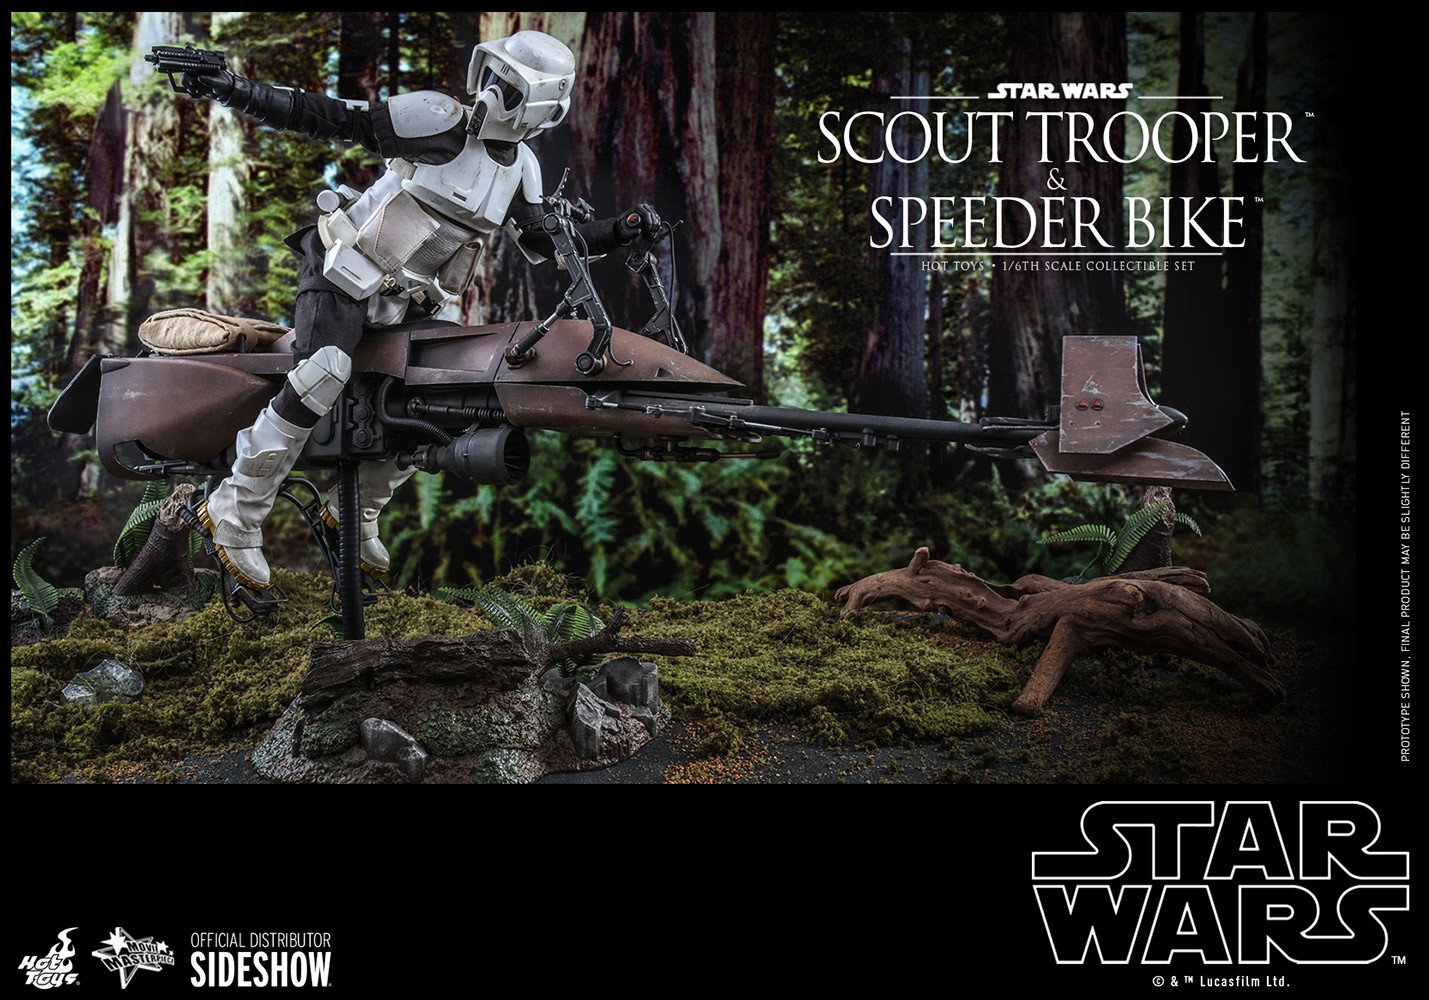 Scout Trooper - Sixth Scale Figure Set by Hot Toys